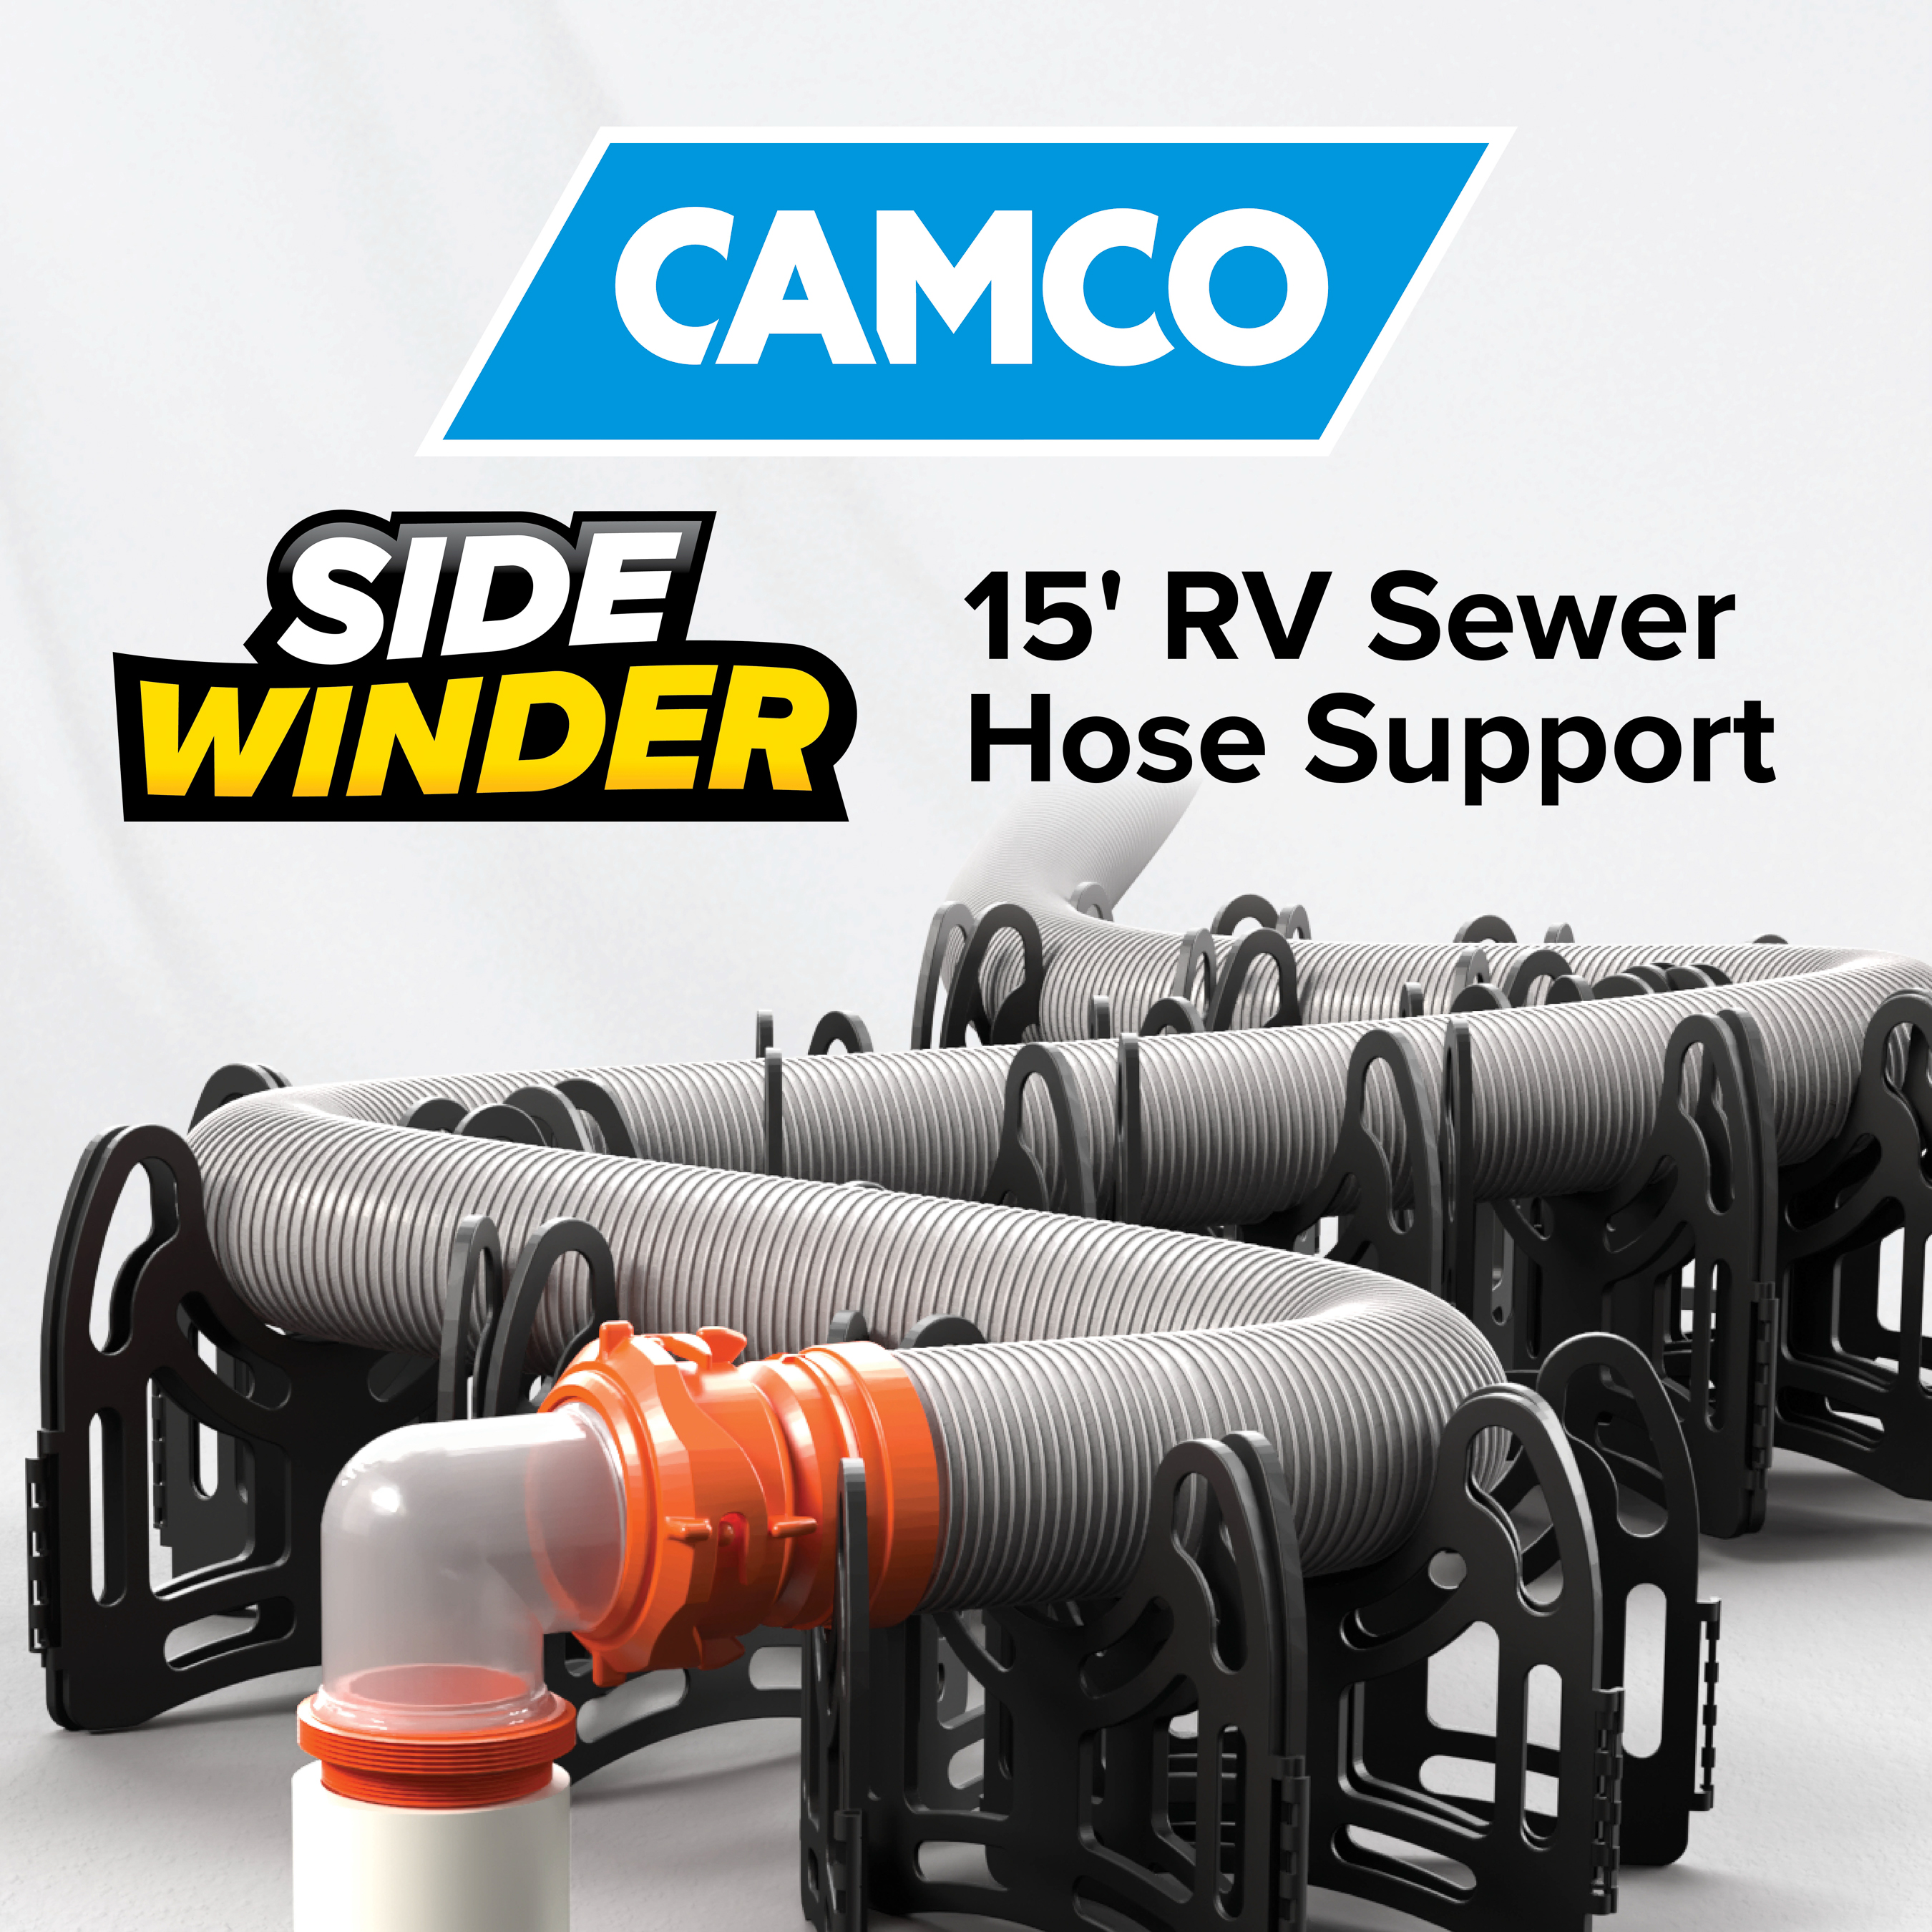 Camco Sidewinder RV Sewer Hose Support - Black, Heavy Duty Plastic, 15-Foot (43041) - image 2 of 7